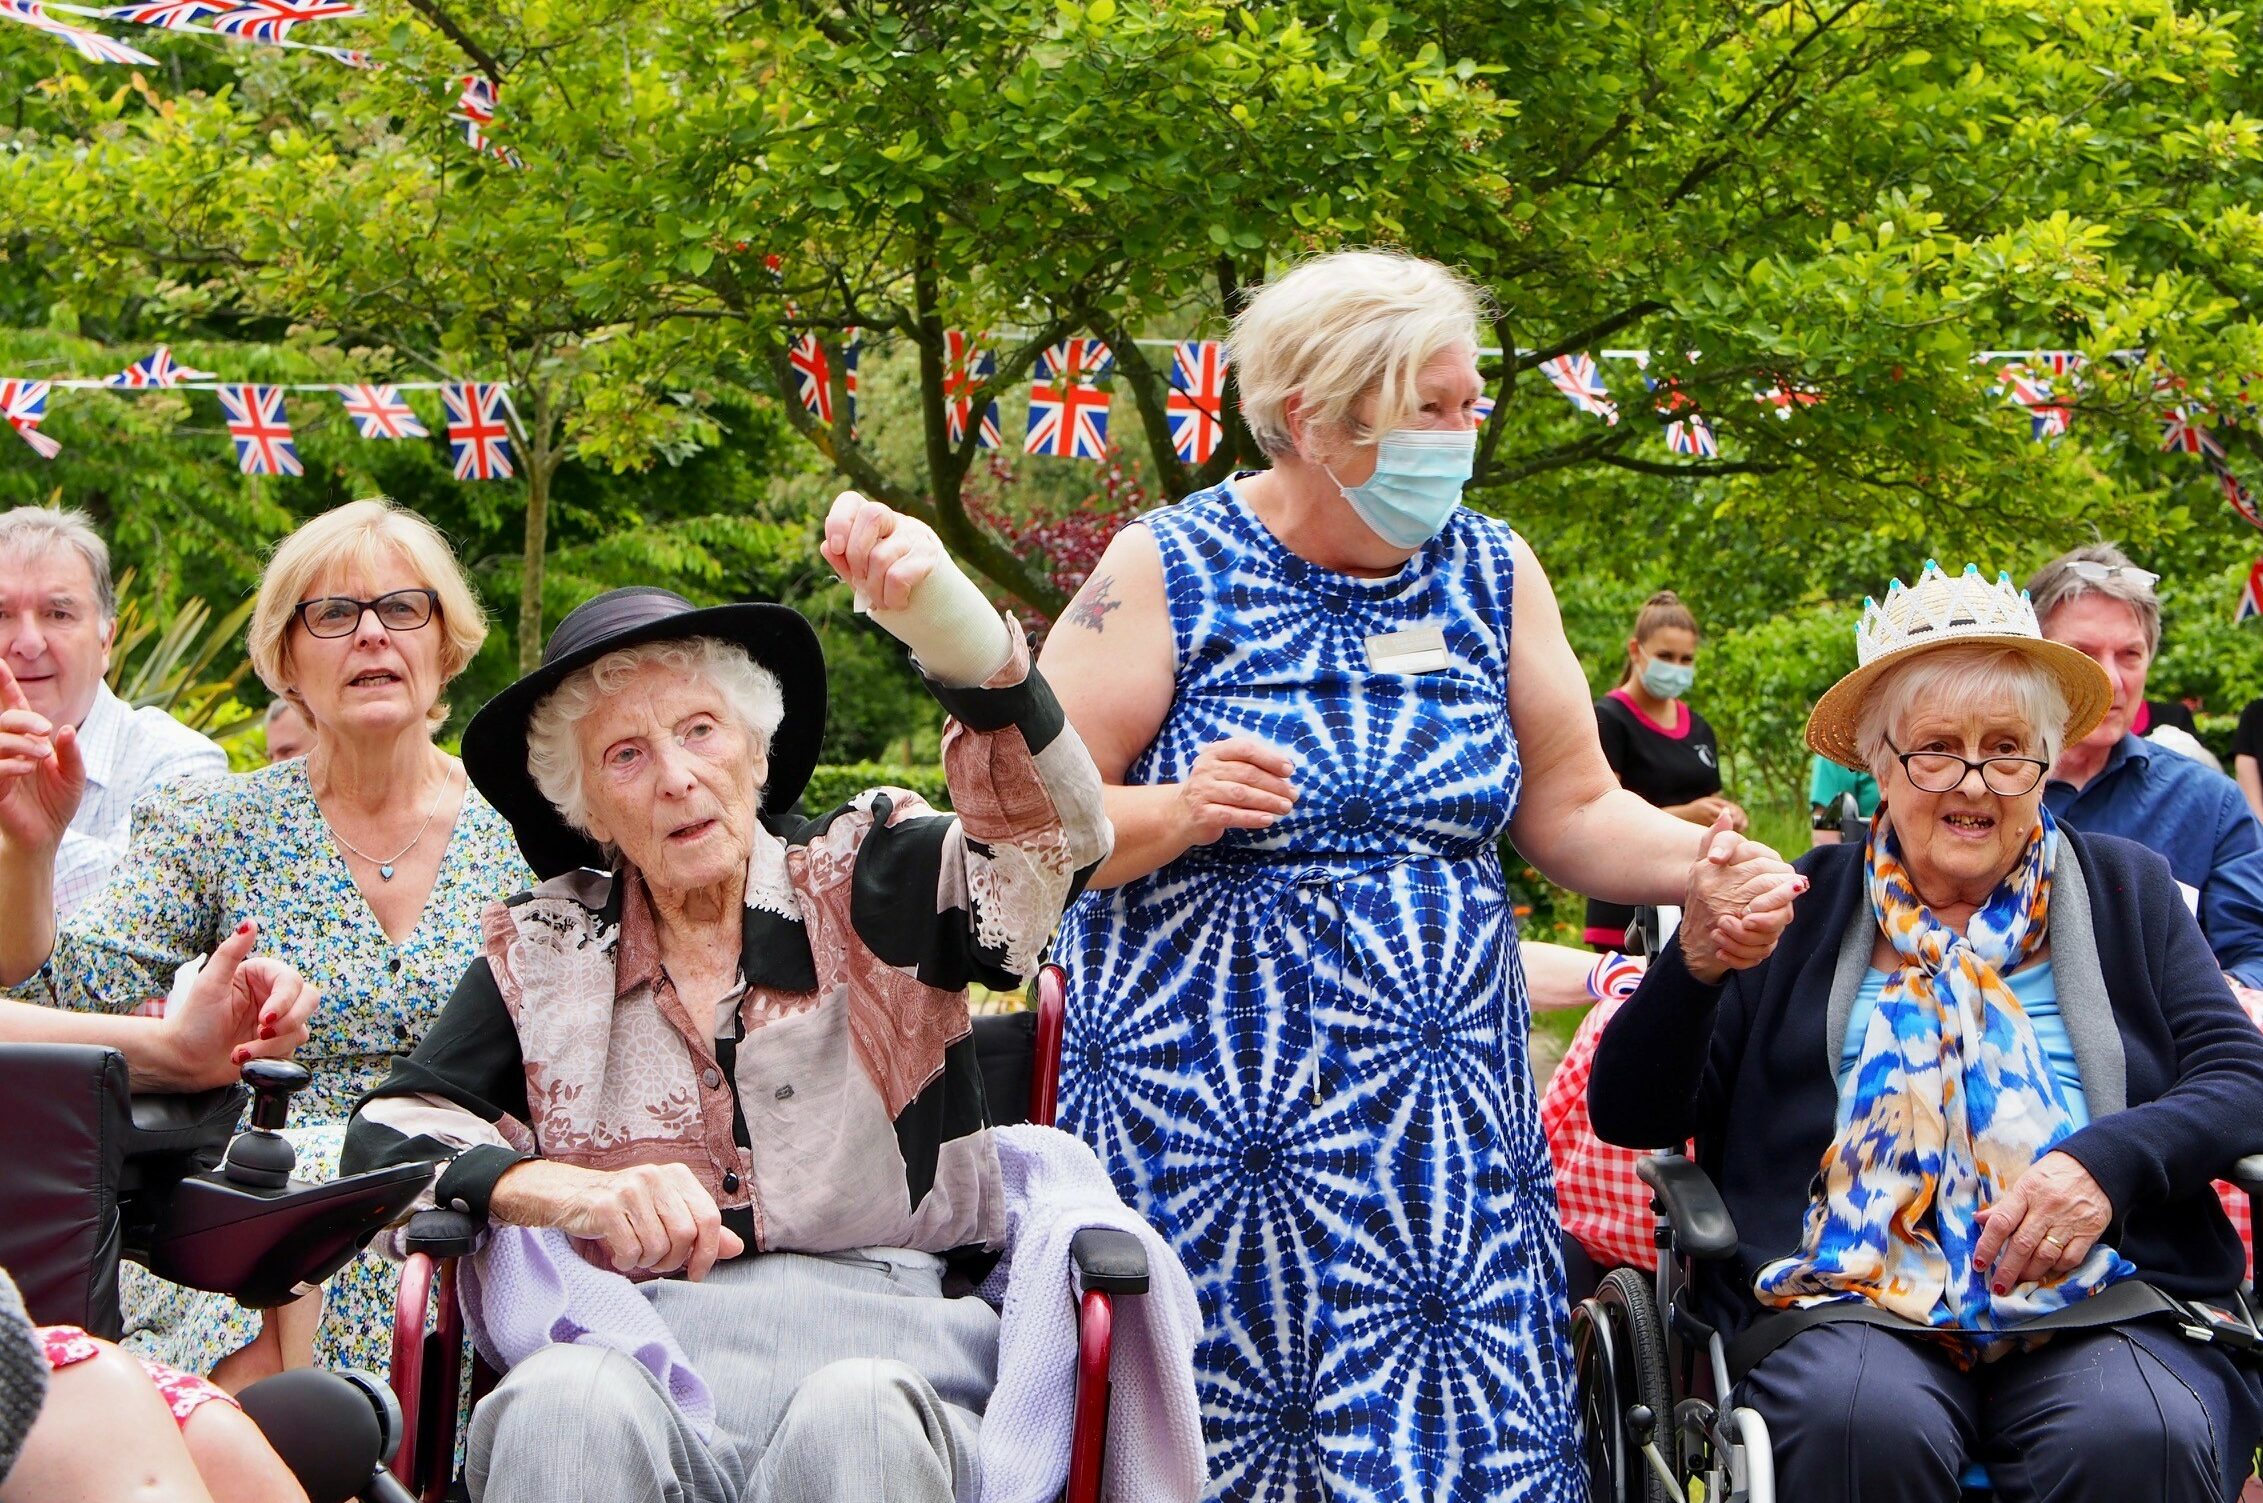 Care home residents enjoying an outdoor event for Care Home Open Week